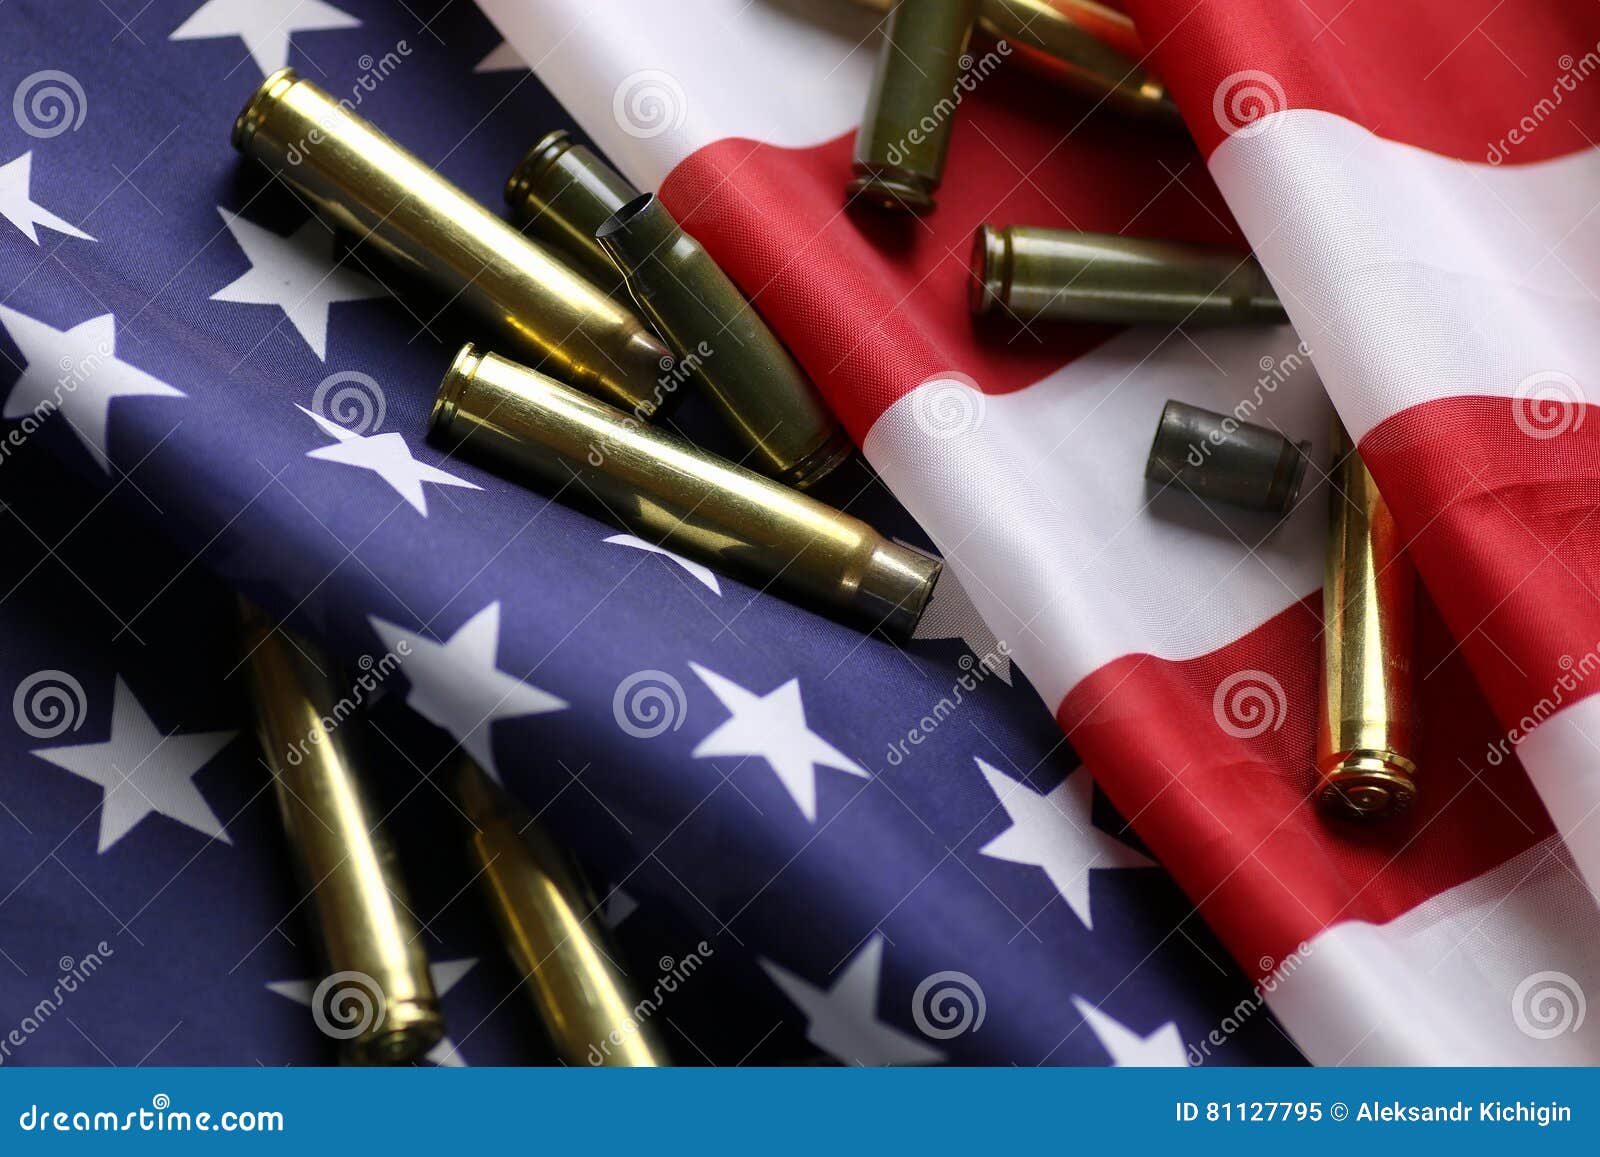 Download Bullet on the USA flag stock image. Image of flag ...